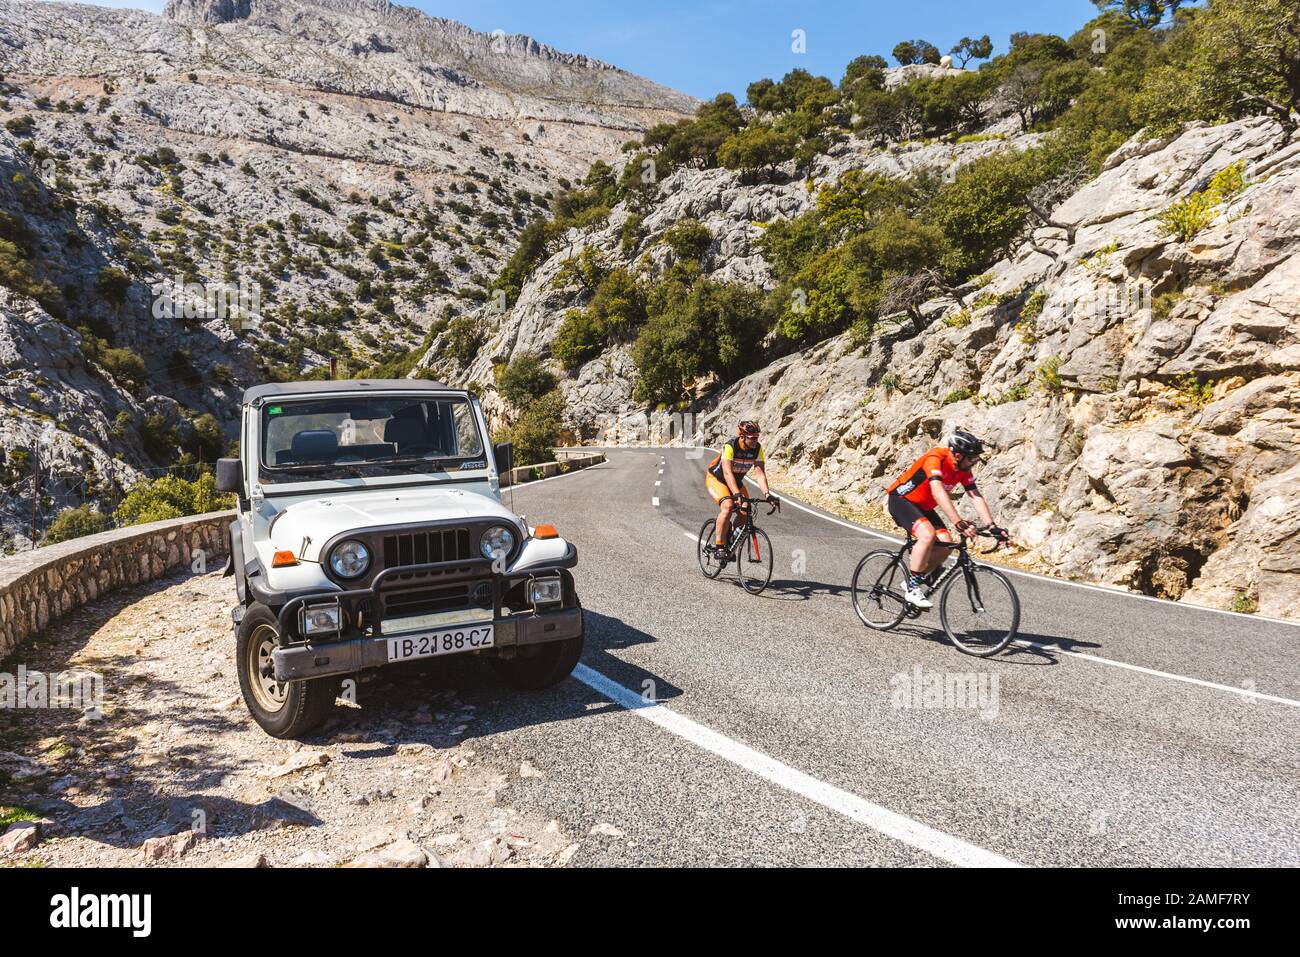 Mallorca, Spain - May 7, 2019: Cyclists and off-road car on a mountainous road on the island of Majorca Stock Photo